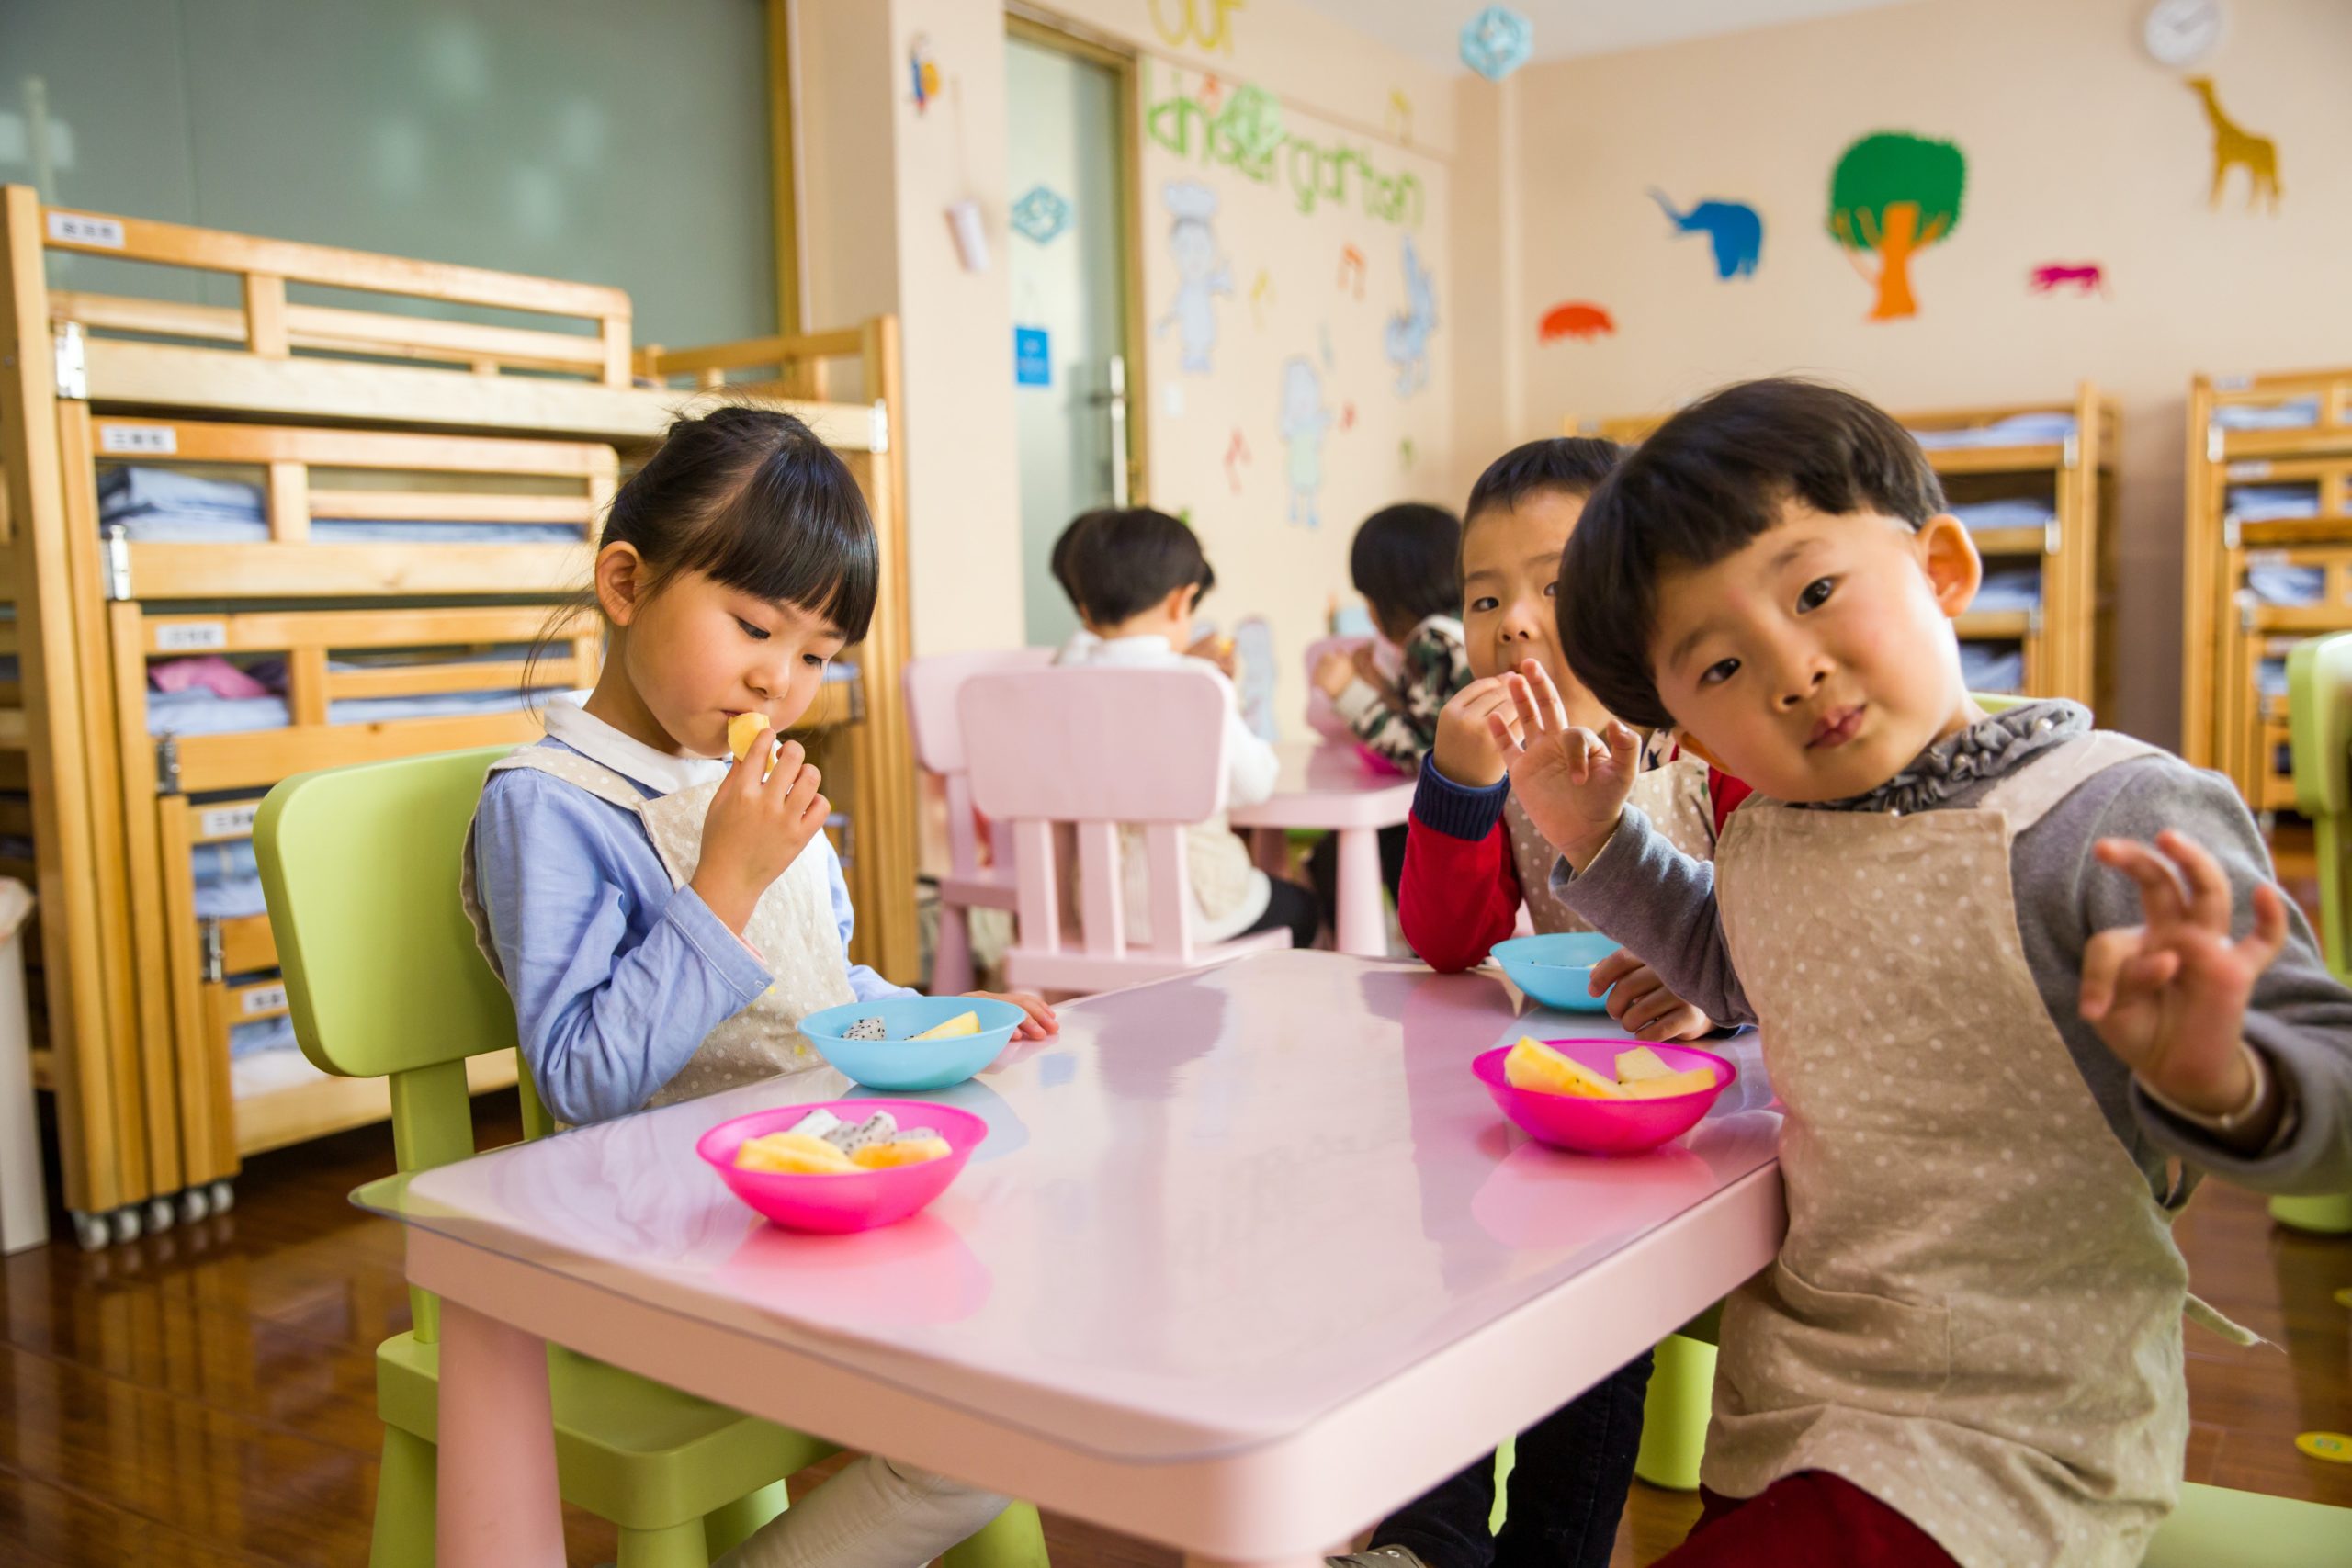 Some pre-school children eat snacks at a table.